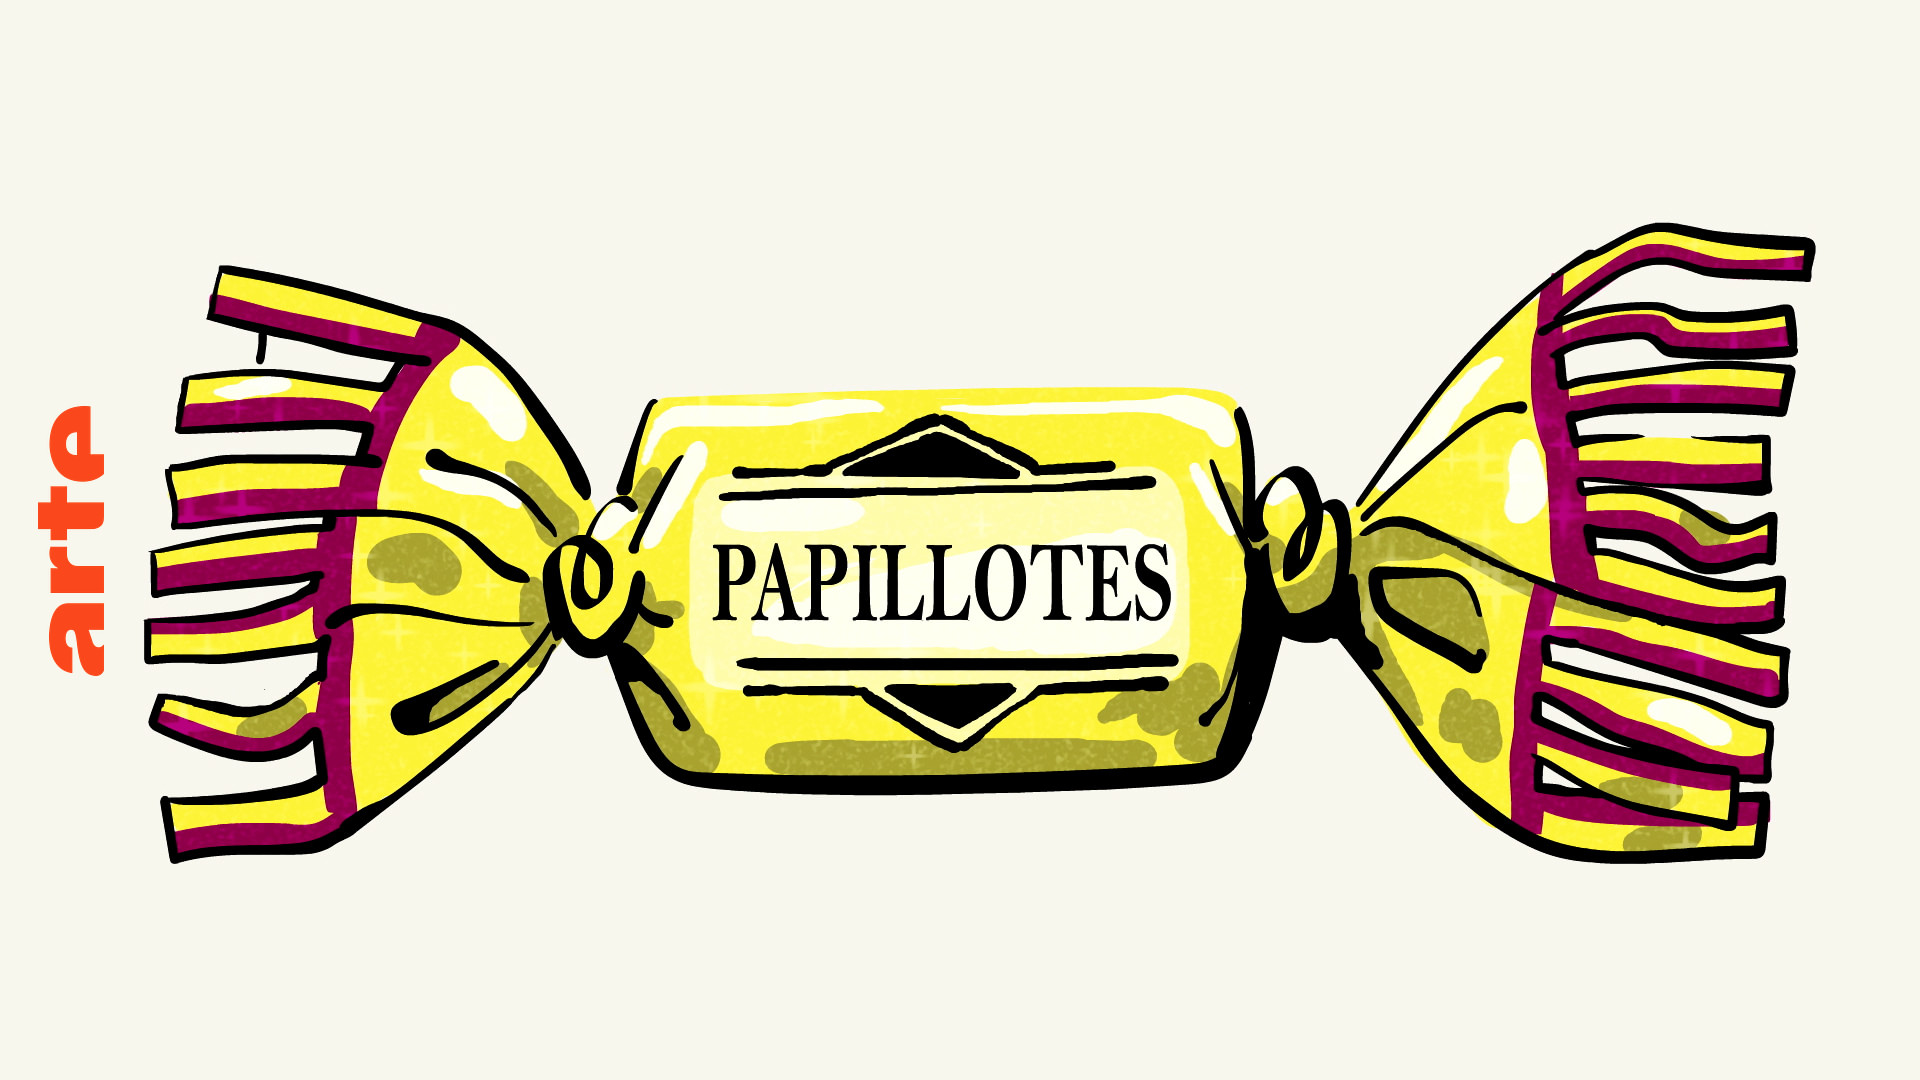 die „Papillotes“